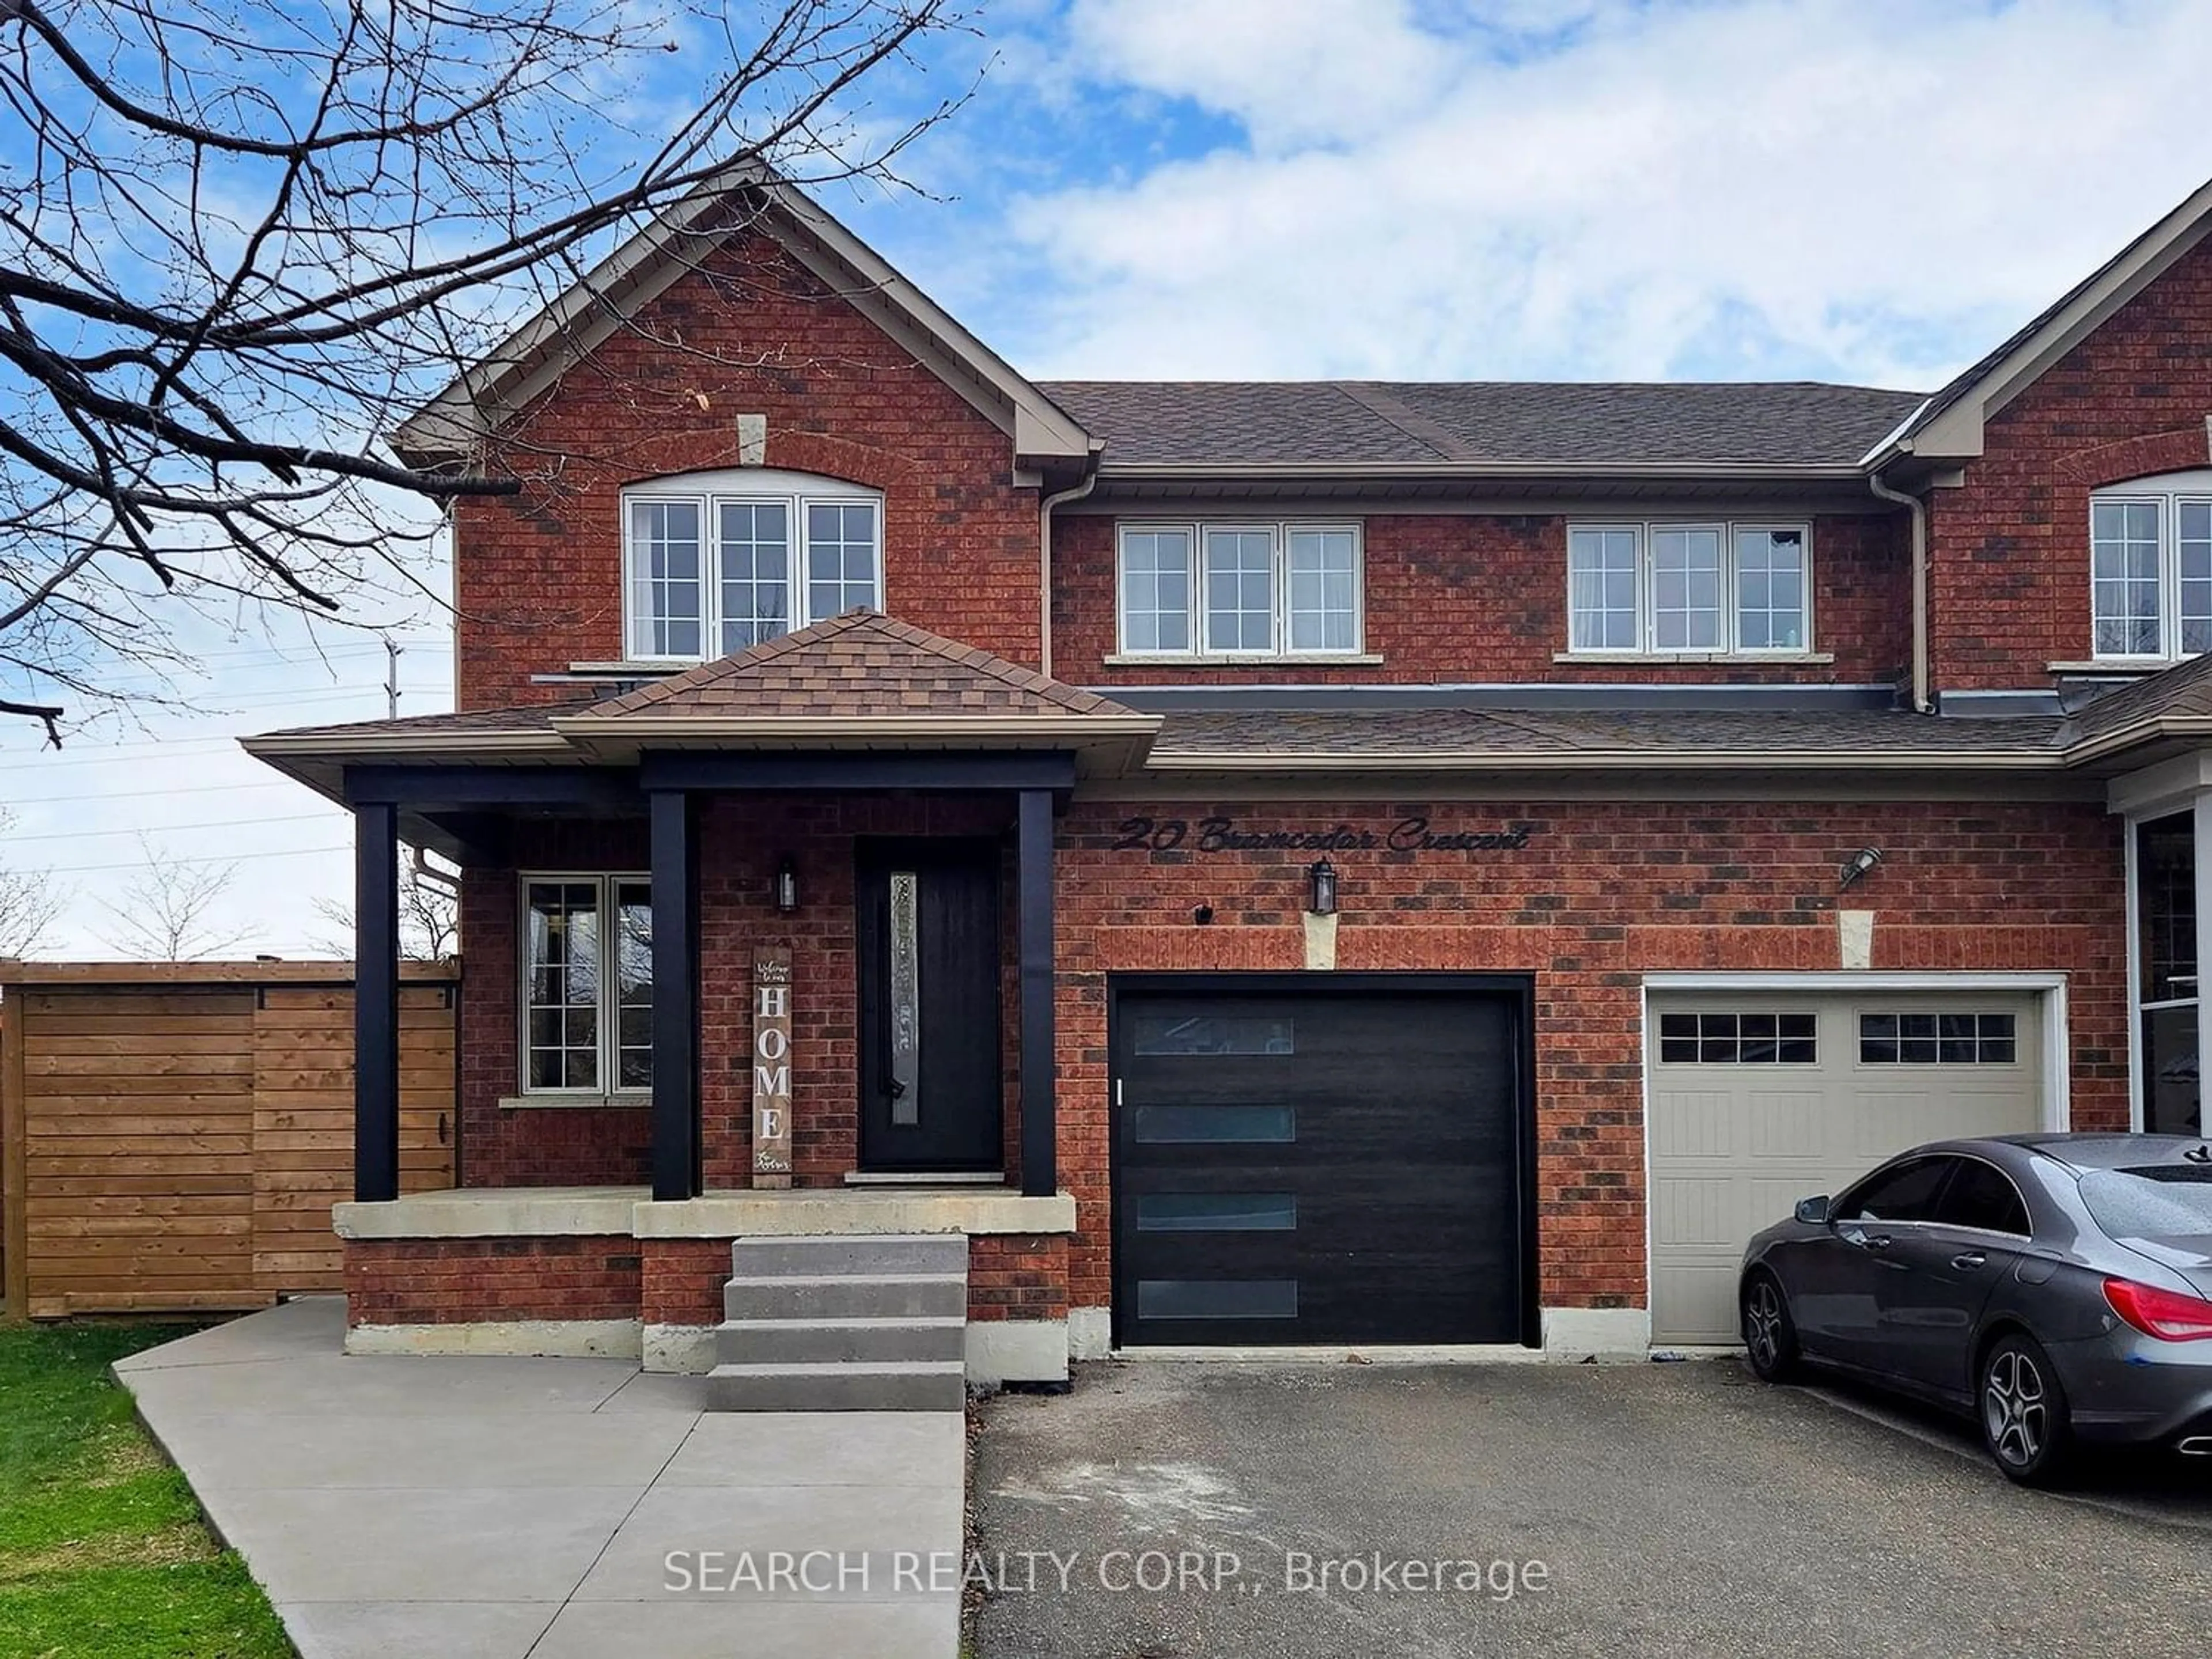 Home with brick exterior material for 20 Bramcedar Cres, Brampton Ontario L7A 1T1